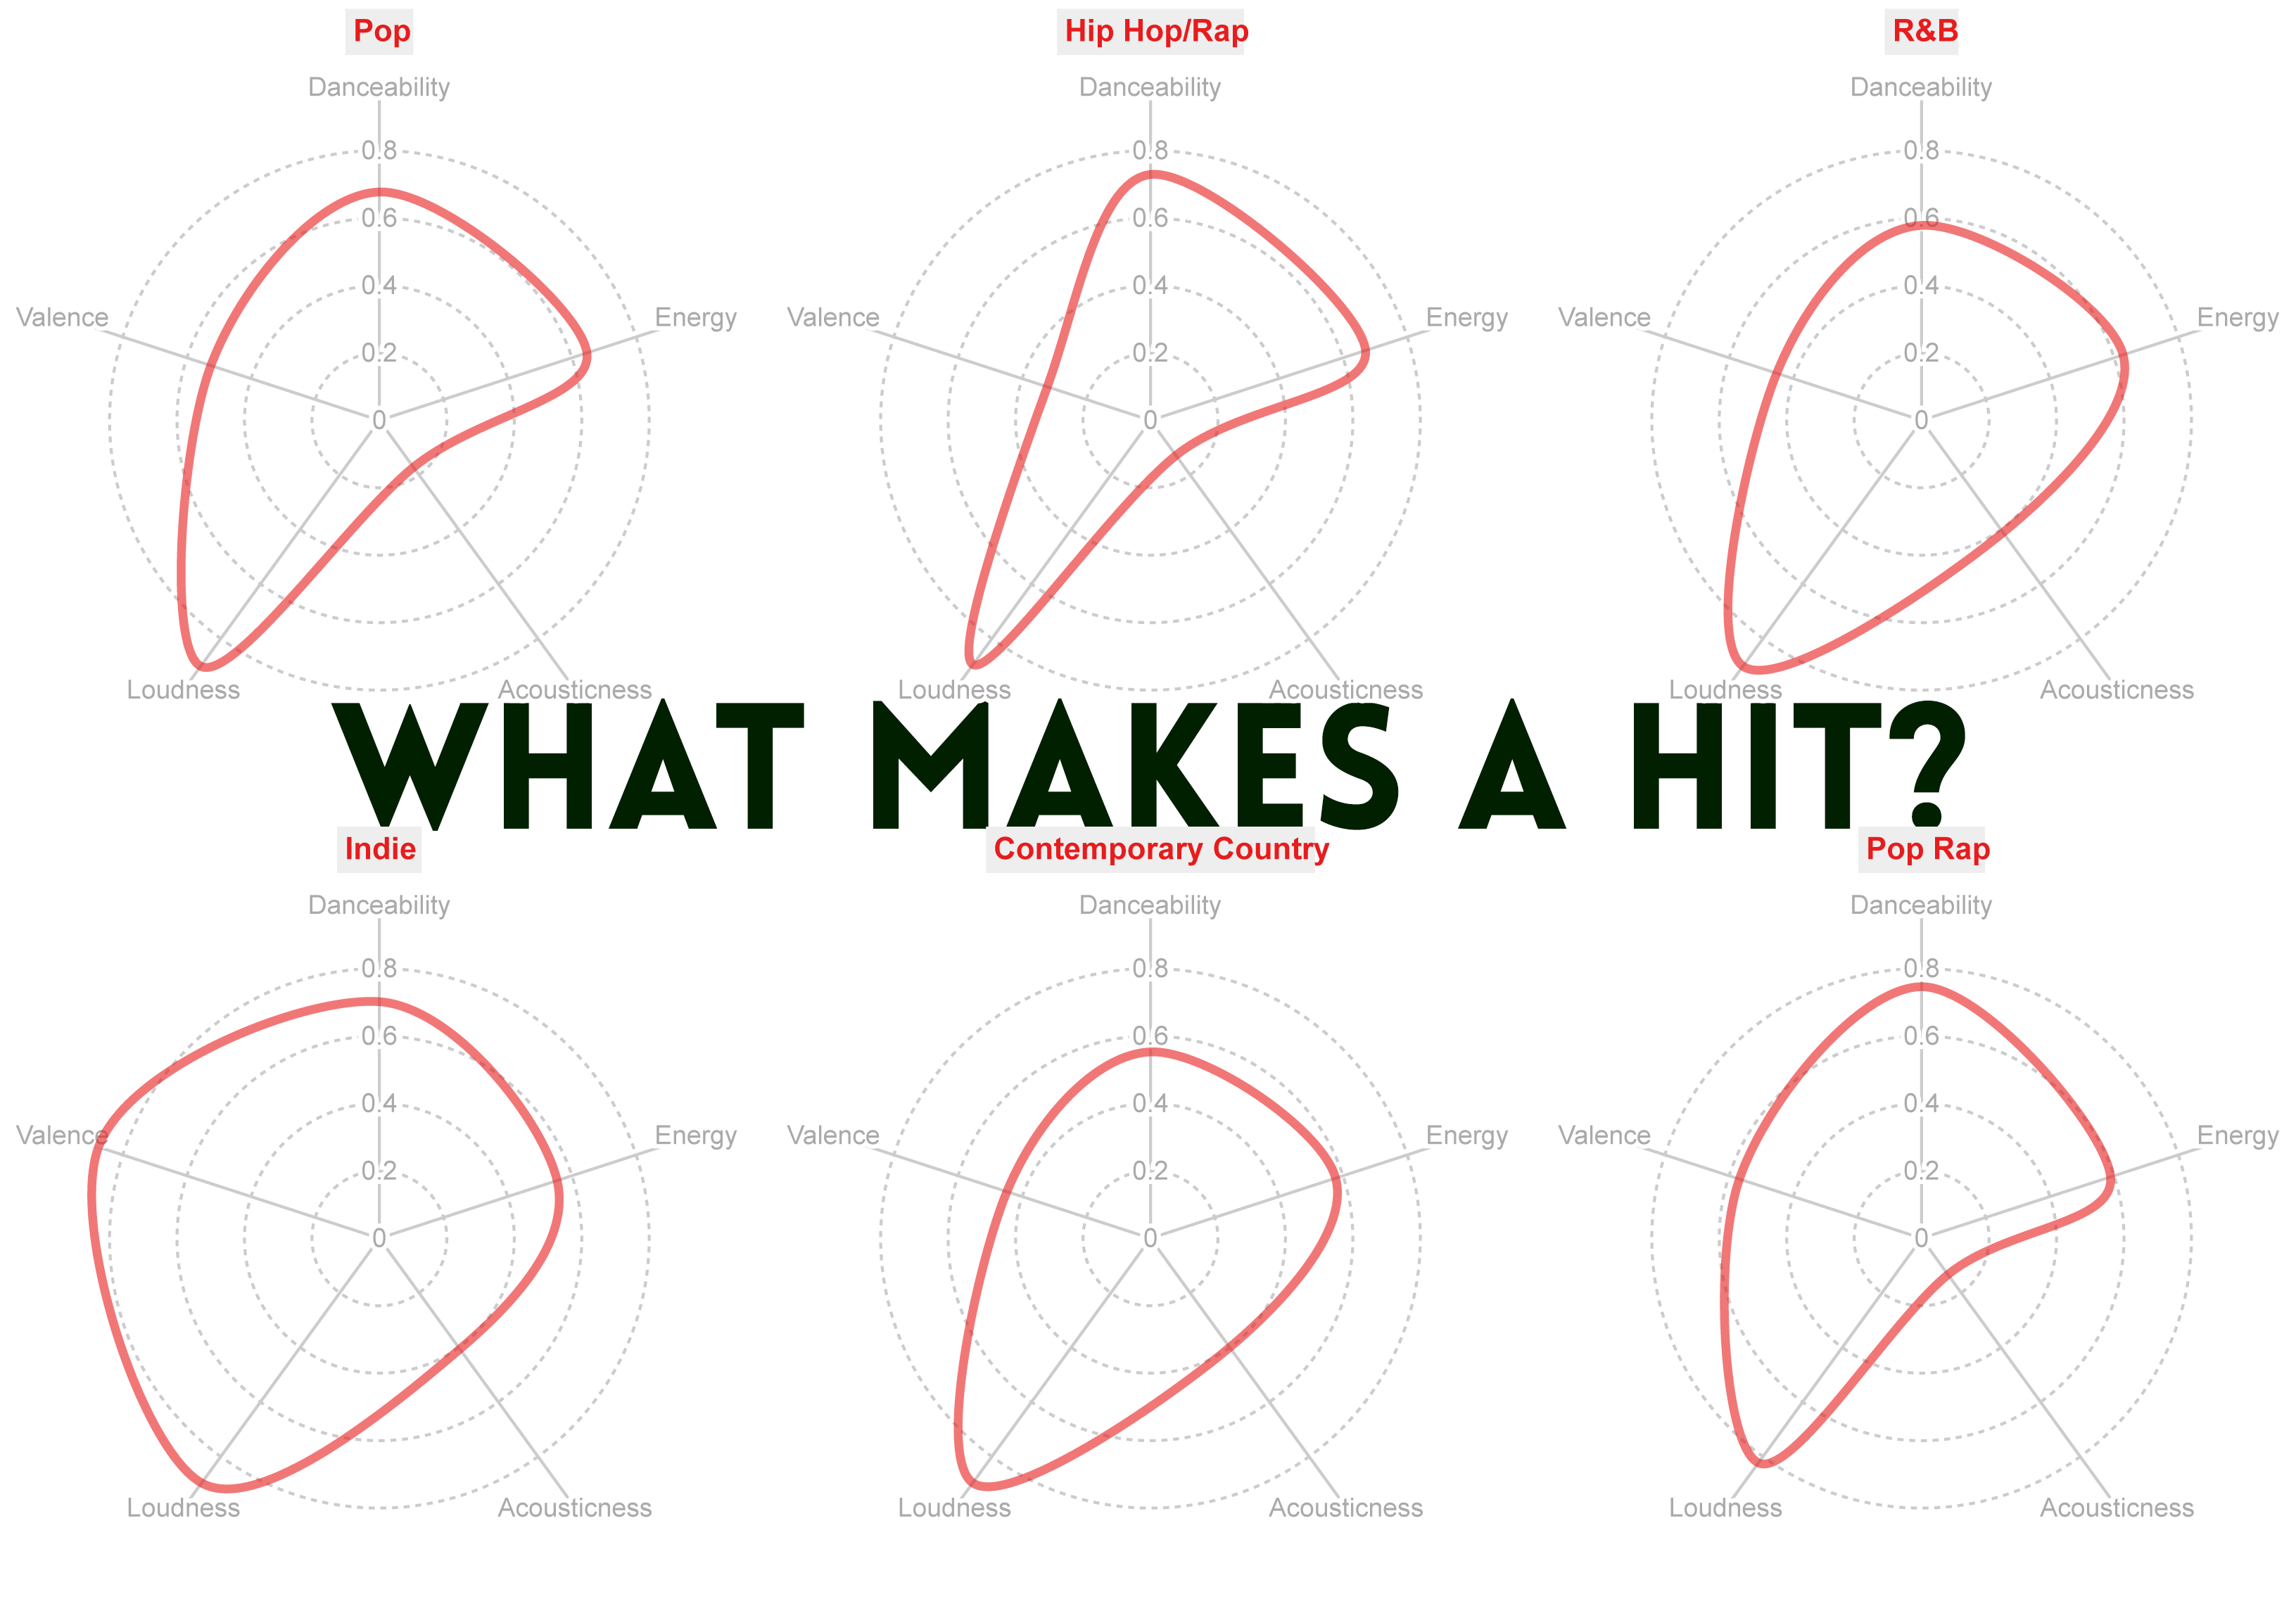 radar charts showing the average features of various genres on the Billboard Hot 100 with overlayed text reading "What Makes a Hit?" in the center